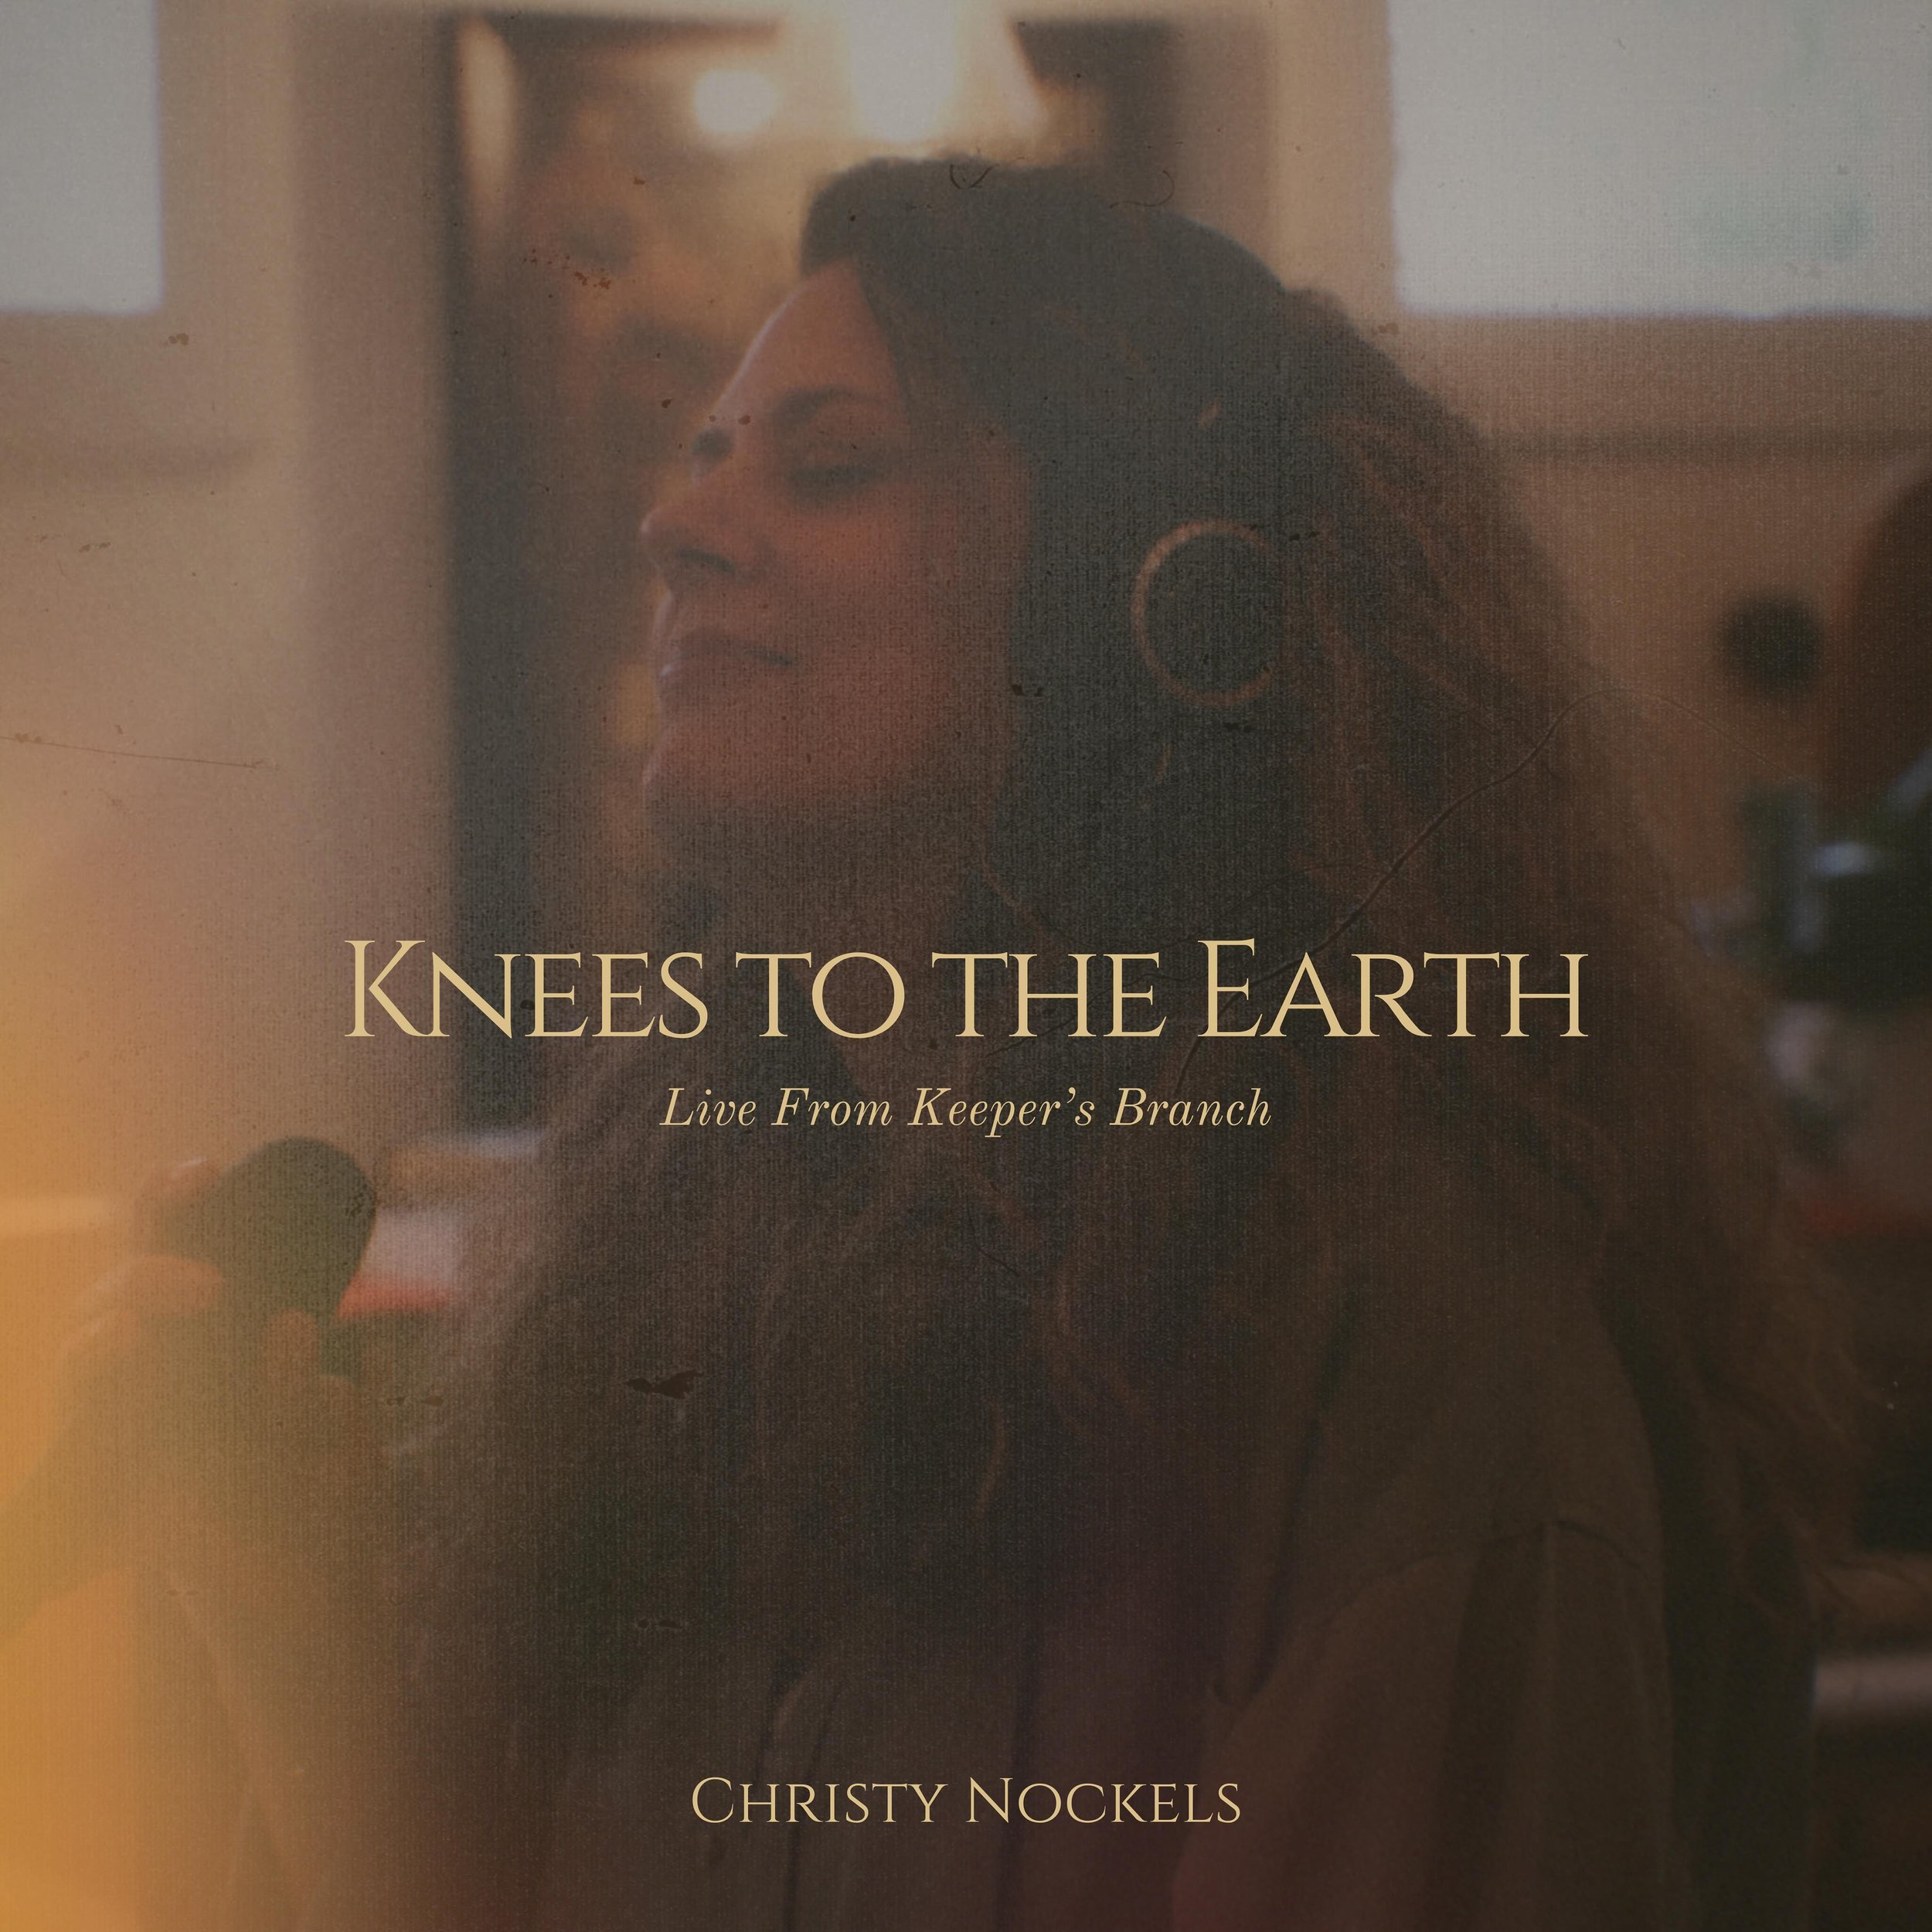 KNEES TO THE EARTH is HERE!! The 2nd EP from the &ldquo;Live&nbsp;from Keeper&rsquo;s Branch&rdquo; album is available everywhere you listen to music! All three of these songs have served as an &ldquo;Ebenezer&rdquo; in my walk with the Lord, songs t